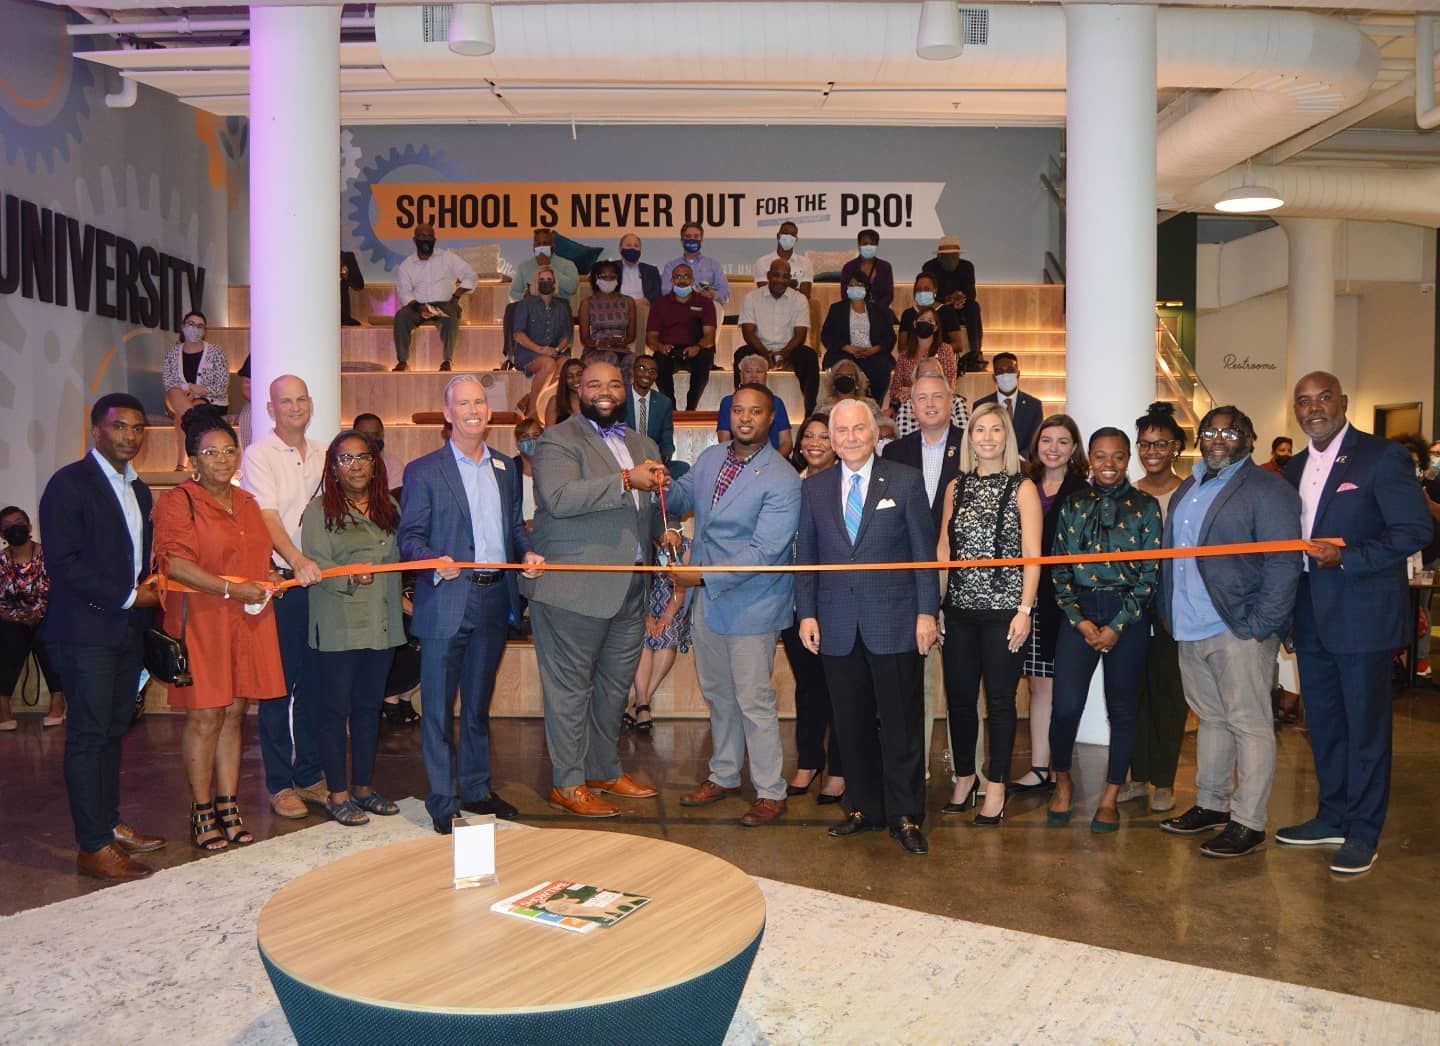 an image of a ribbon cutting